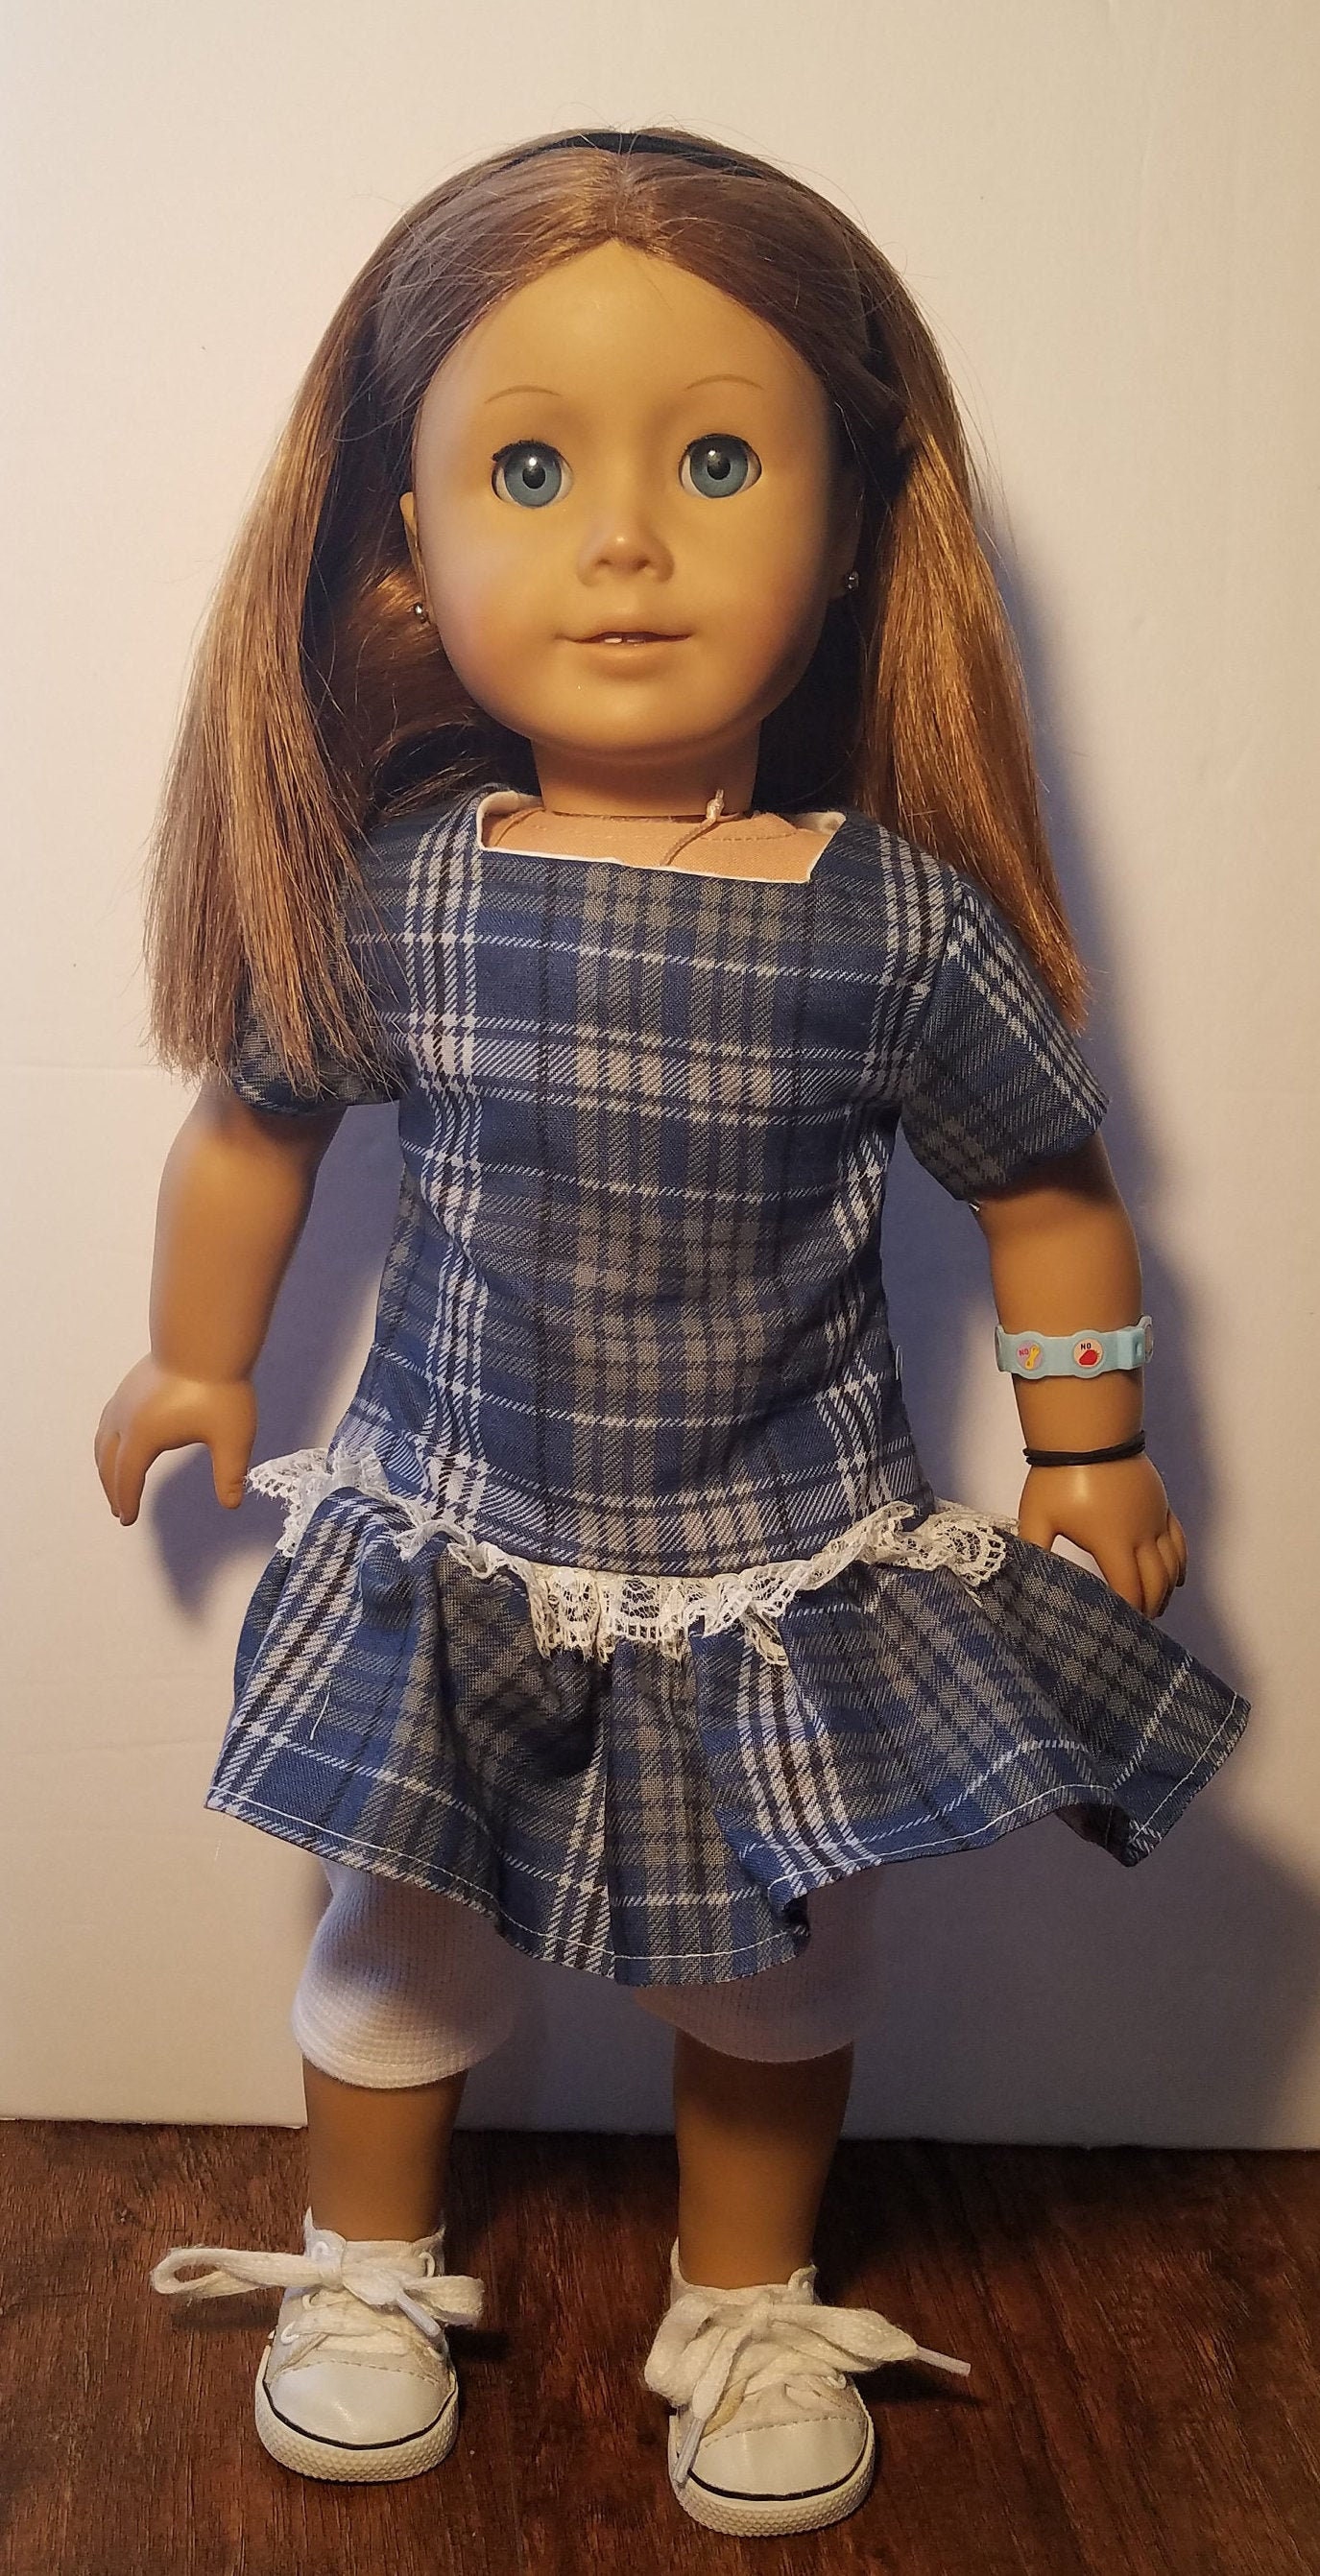 18" Doll Tunic/ Top & Leggings fits 18 inch American Girl Doll Clothes 902abc 